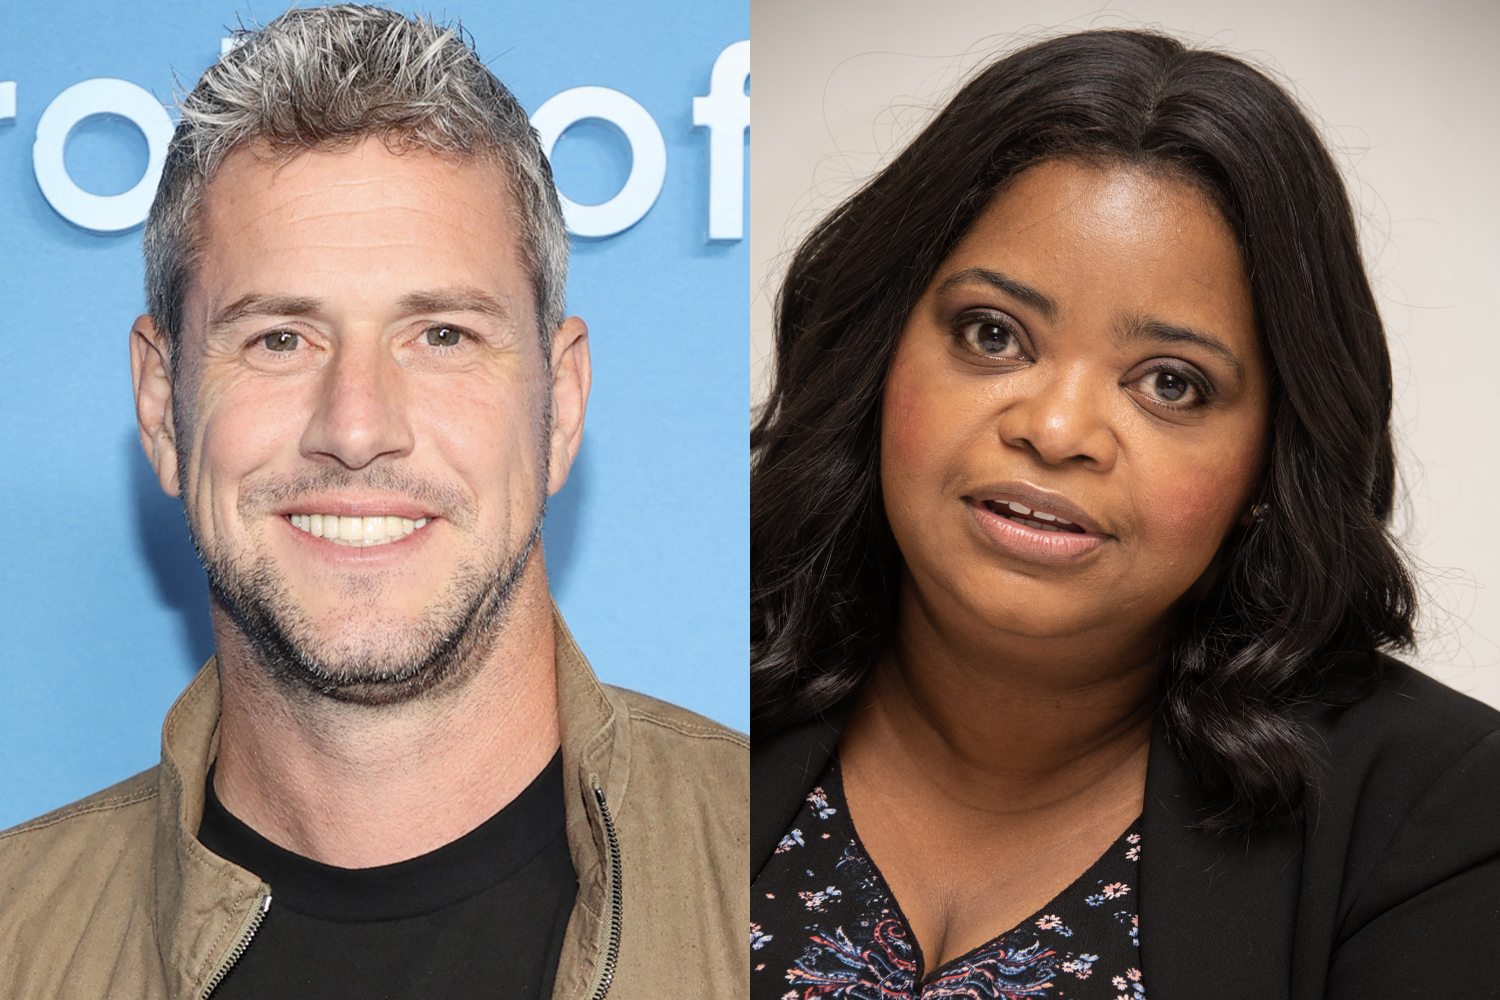 Ant Anstead and Octavia Spencer smiling